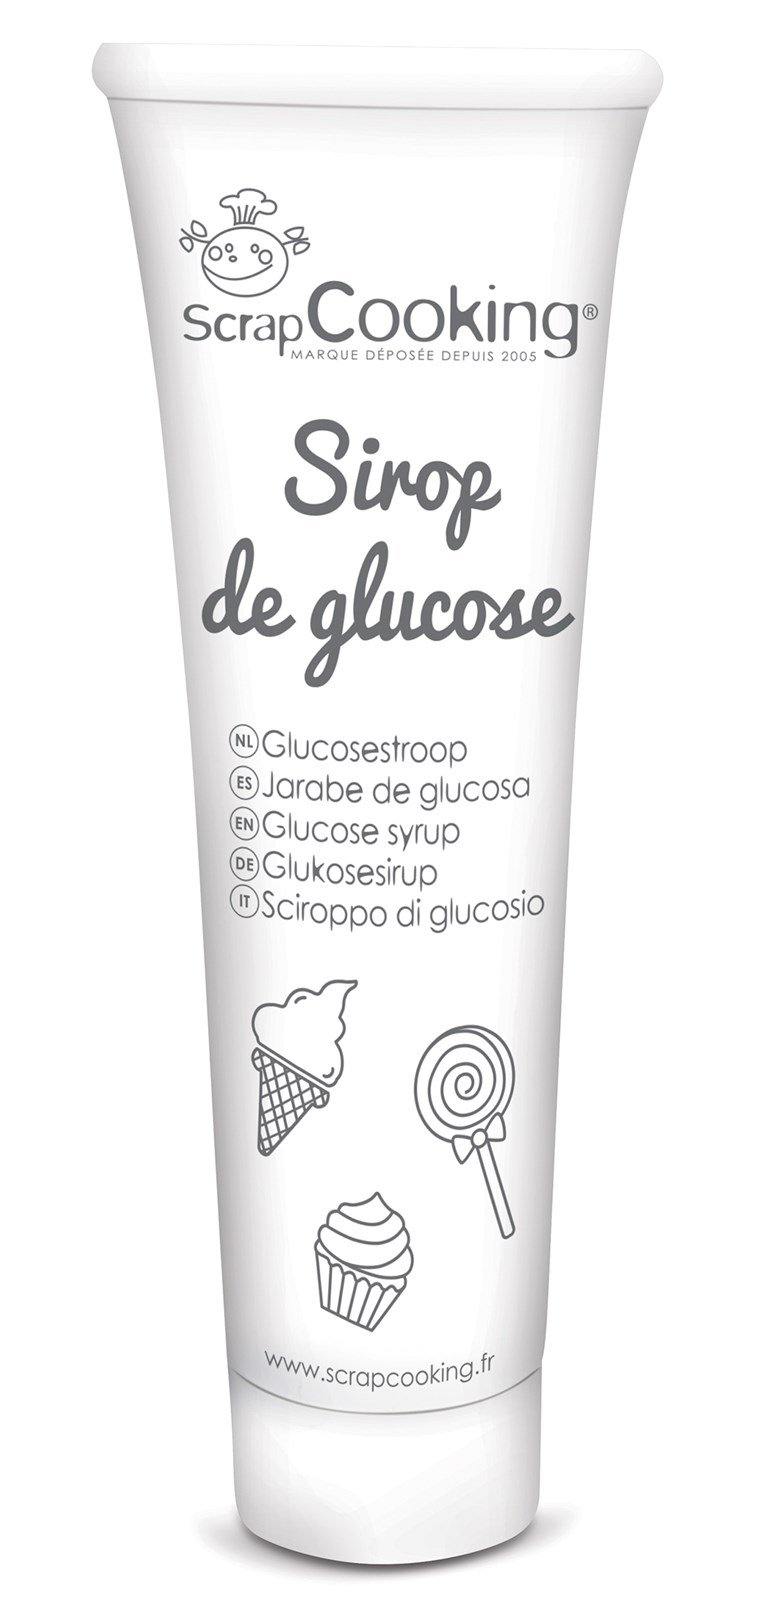 Glukose Sirup in Tube, 200g - MyLiving24